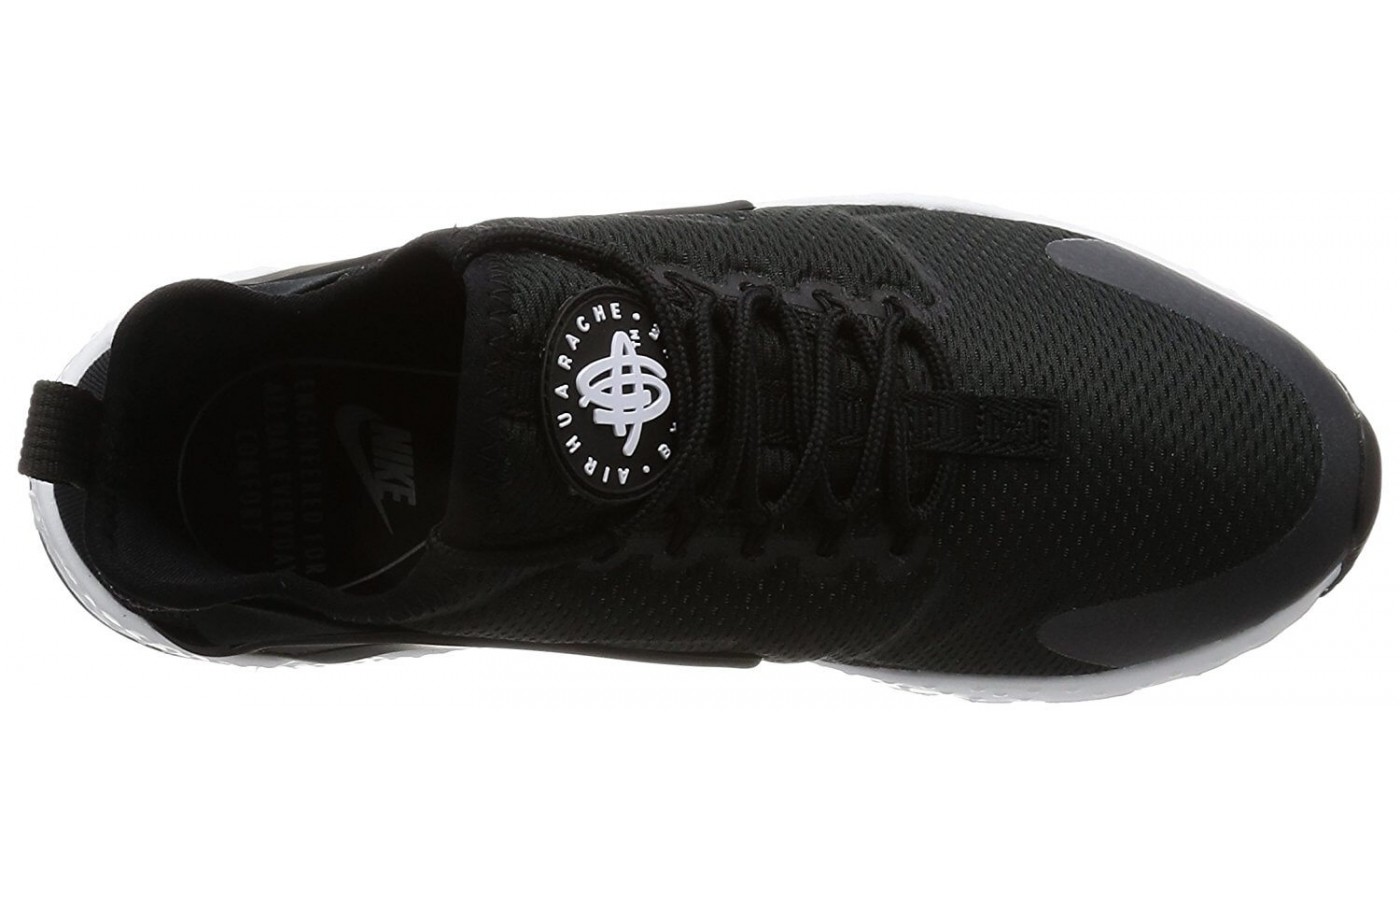 The upper portion of the Nike Air Huarache Ultra is made from layers of breathable mesh fabric.